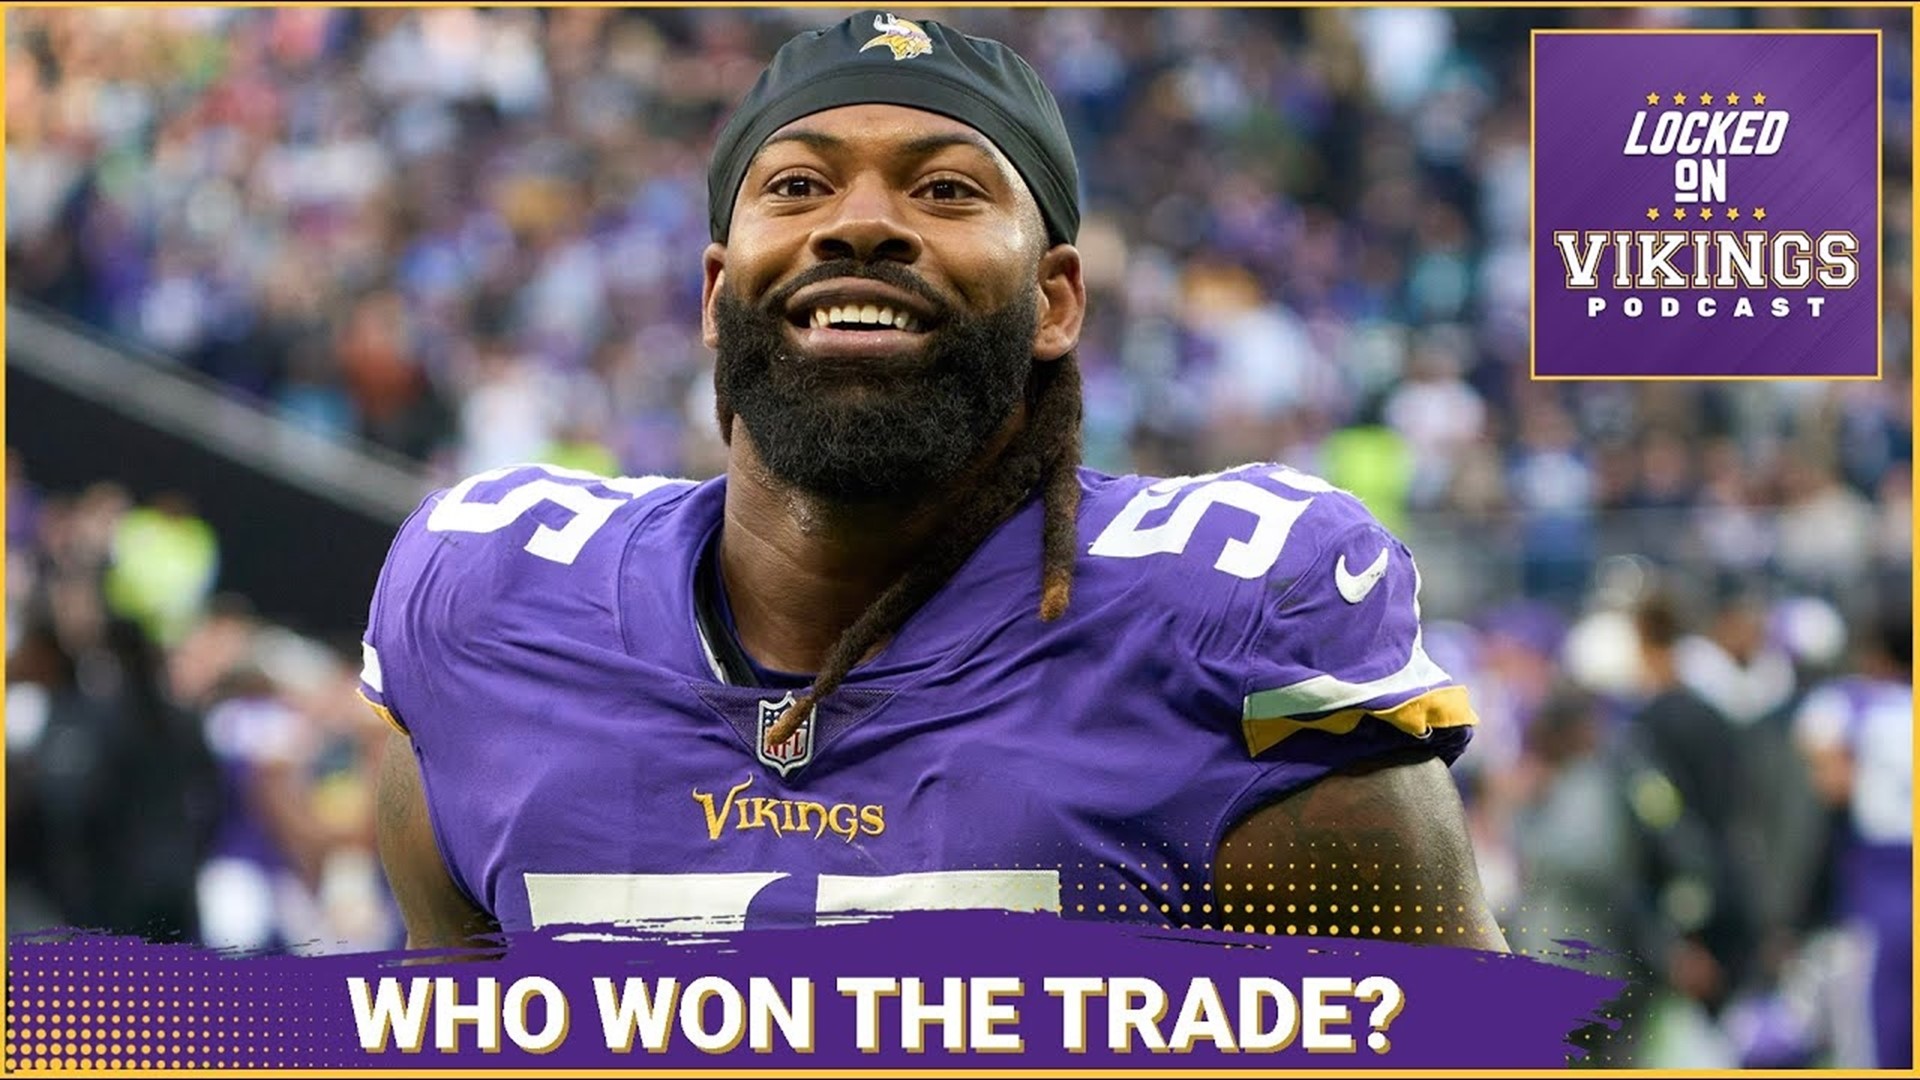 Over the weekend, the Minnesota Vikings traded Za'Darius Smith to the Cleveland Browns. Was that a good idea?